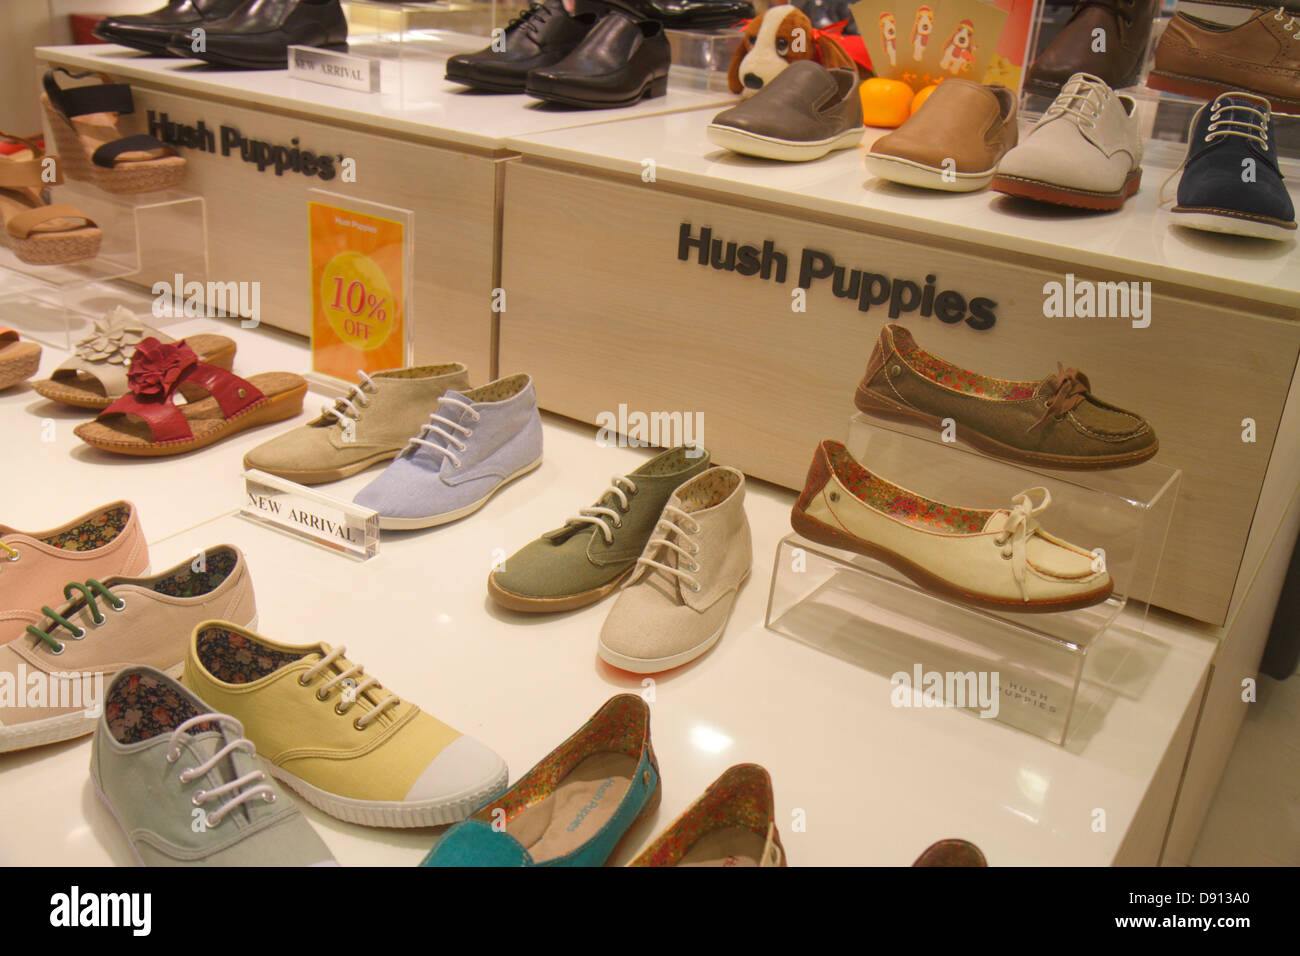 Hush Puppies Shoes High Resolution Stock Photography and - Alamy